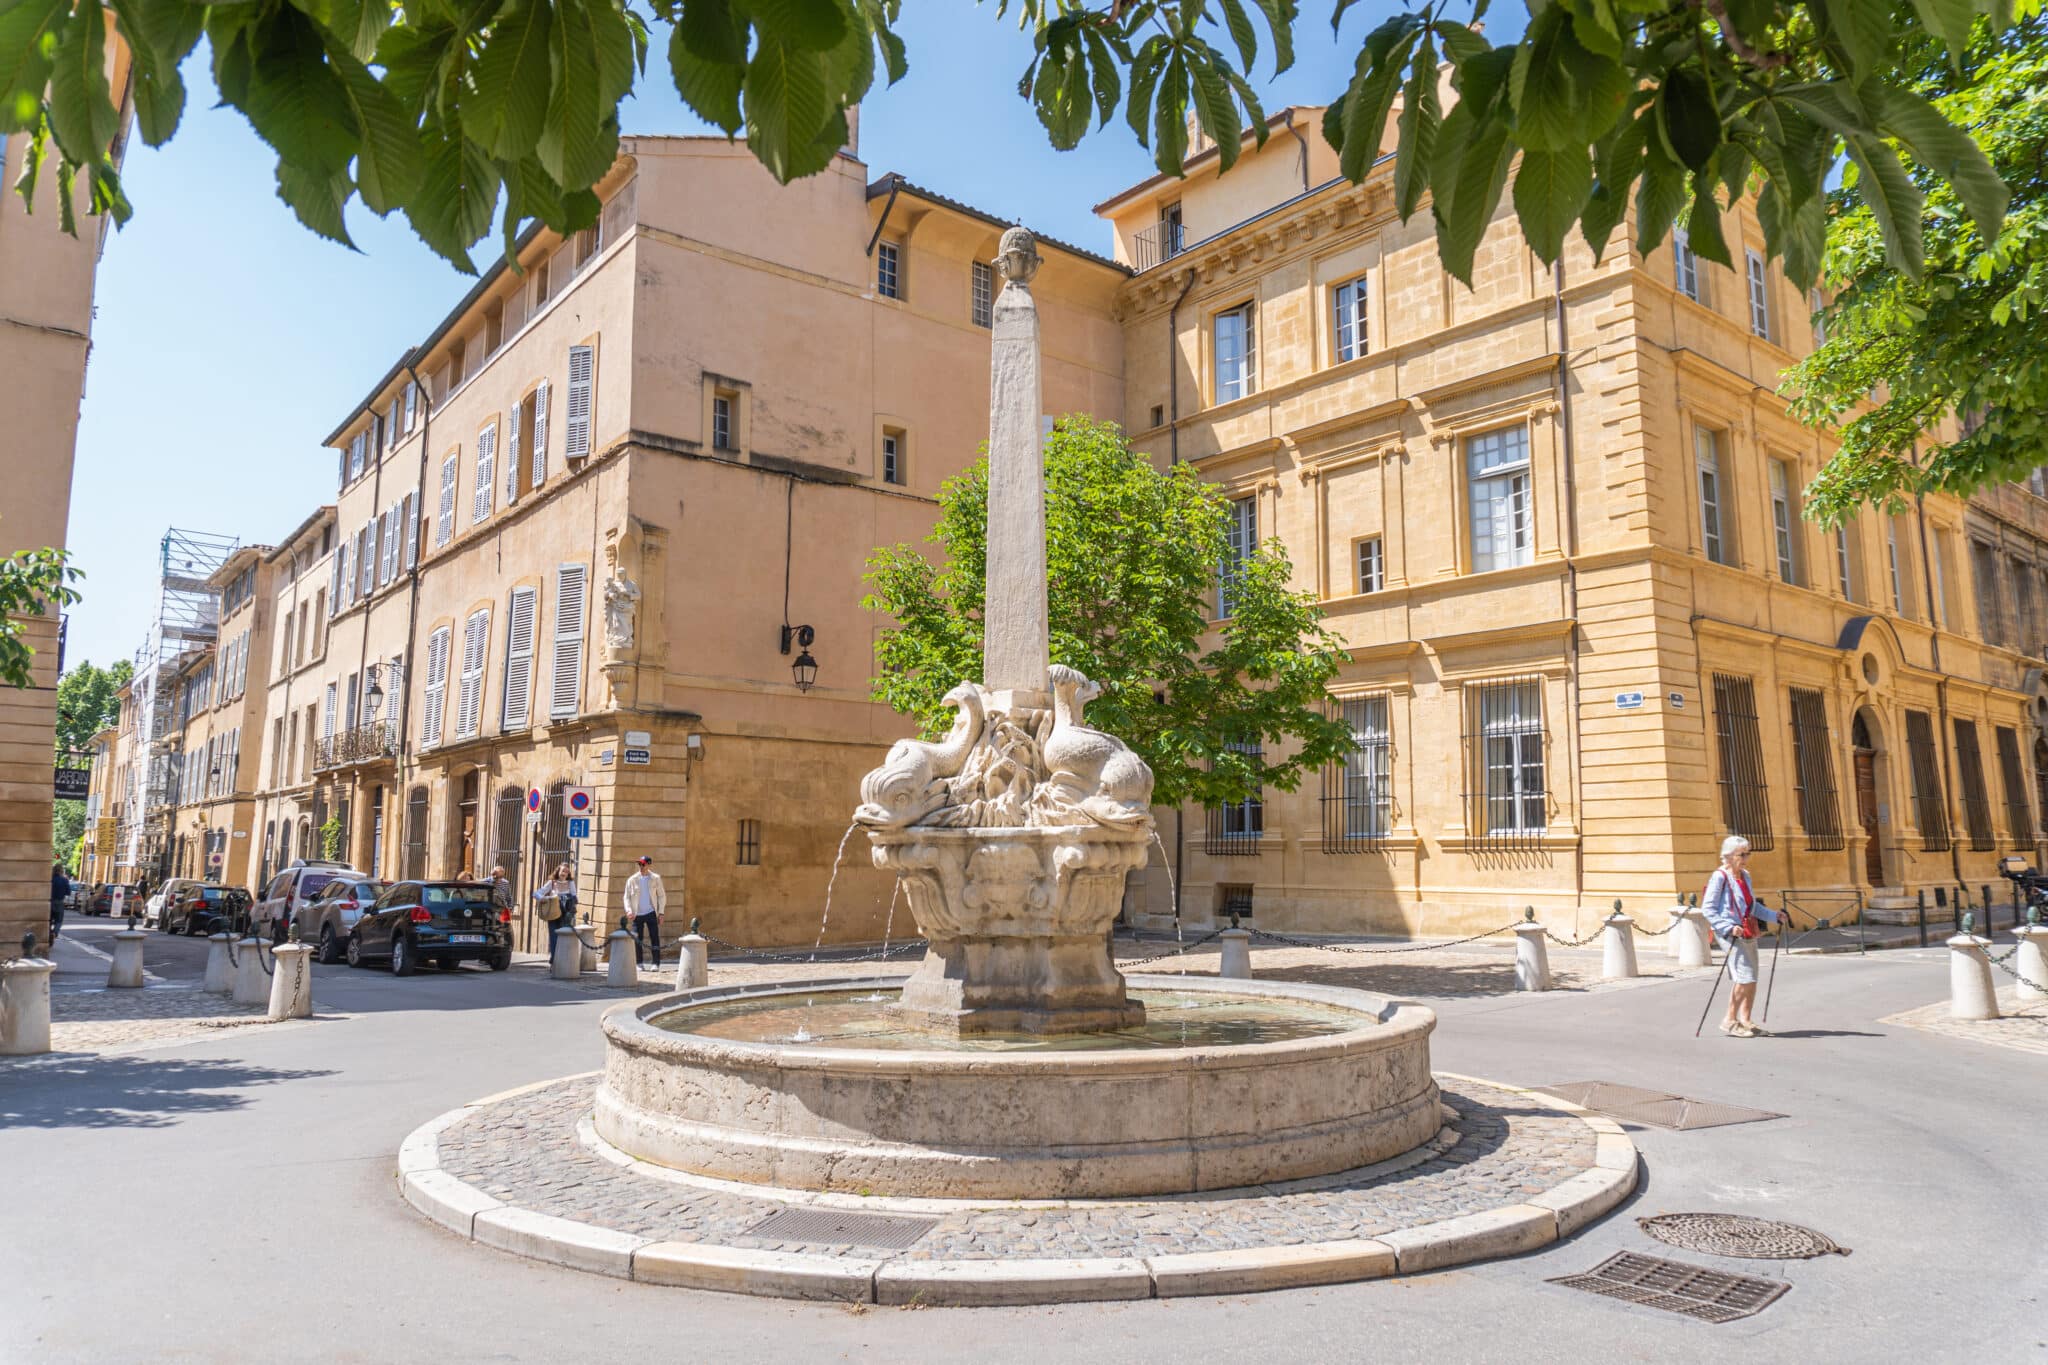 A Square in Aix-en-Provence Old Town